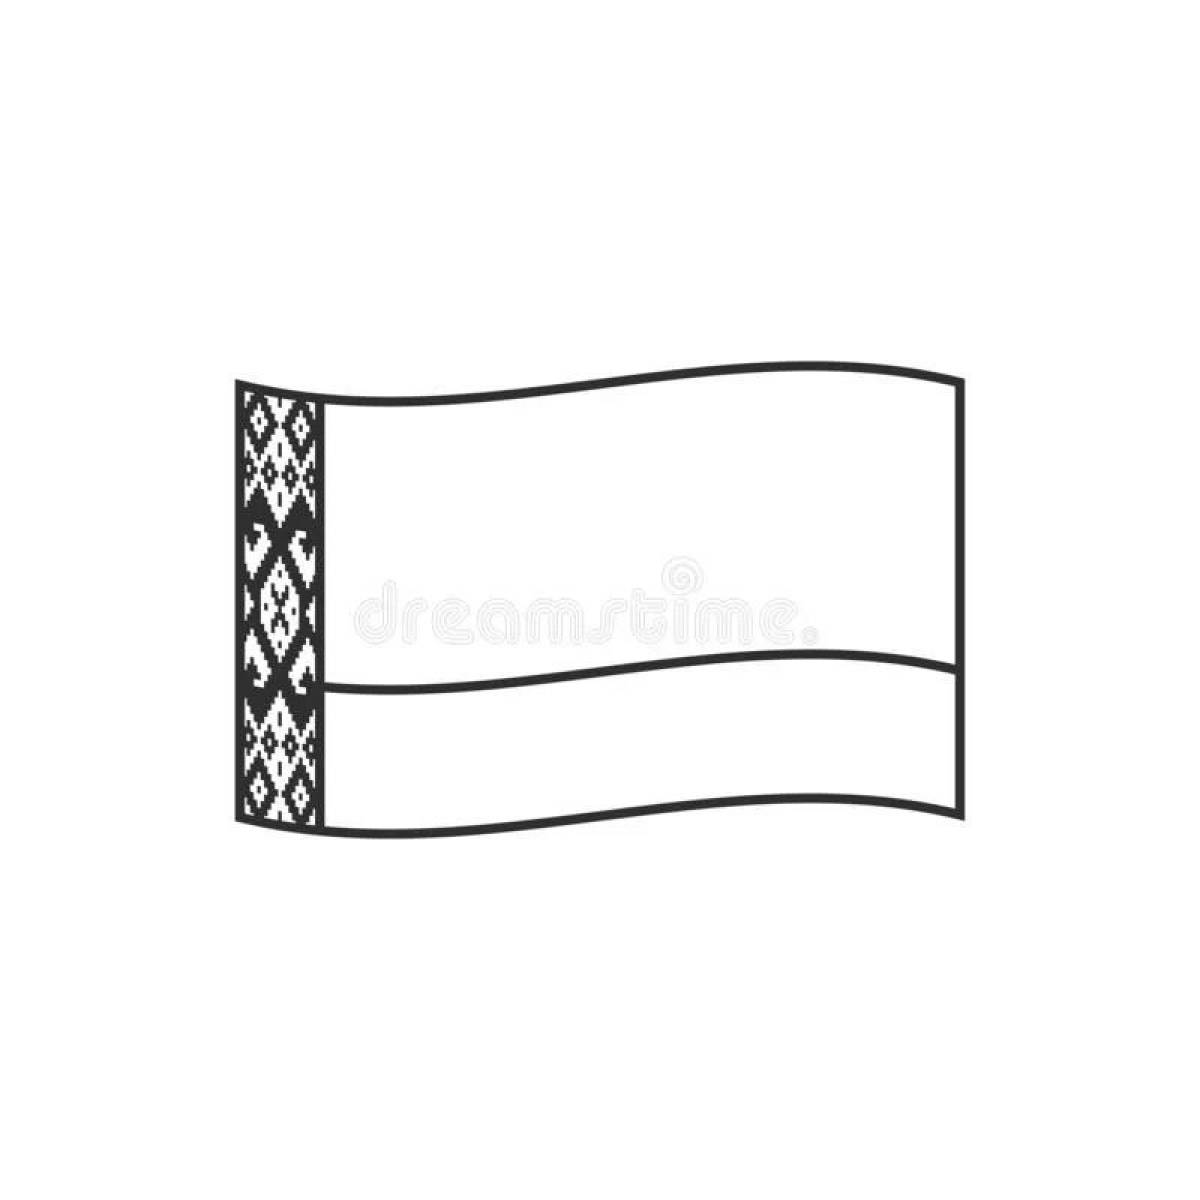 Beautiful rb flag coloring page